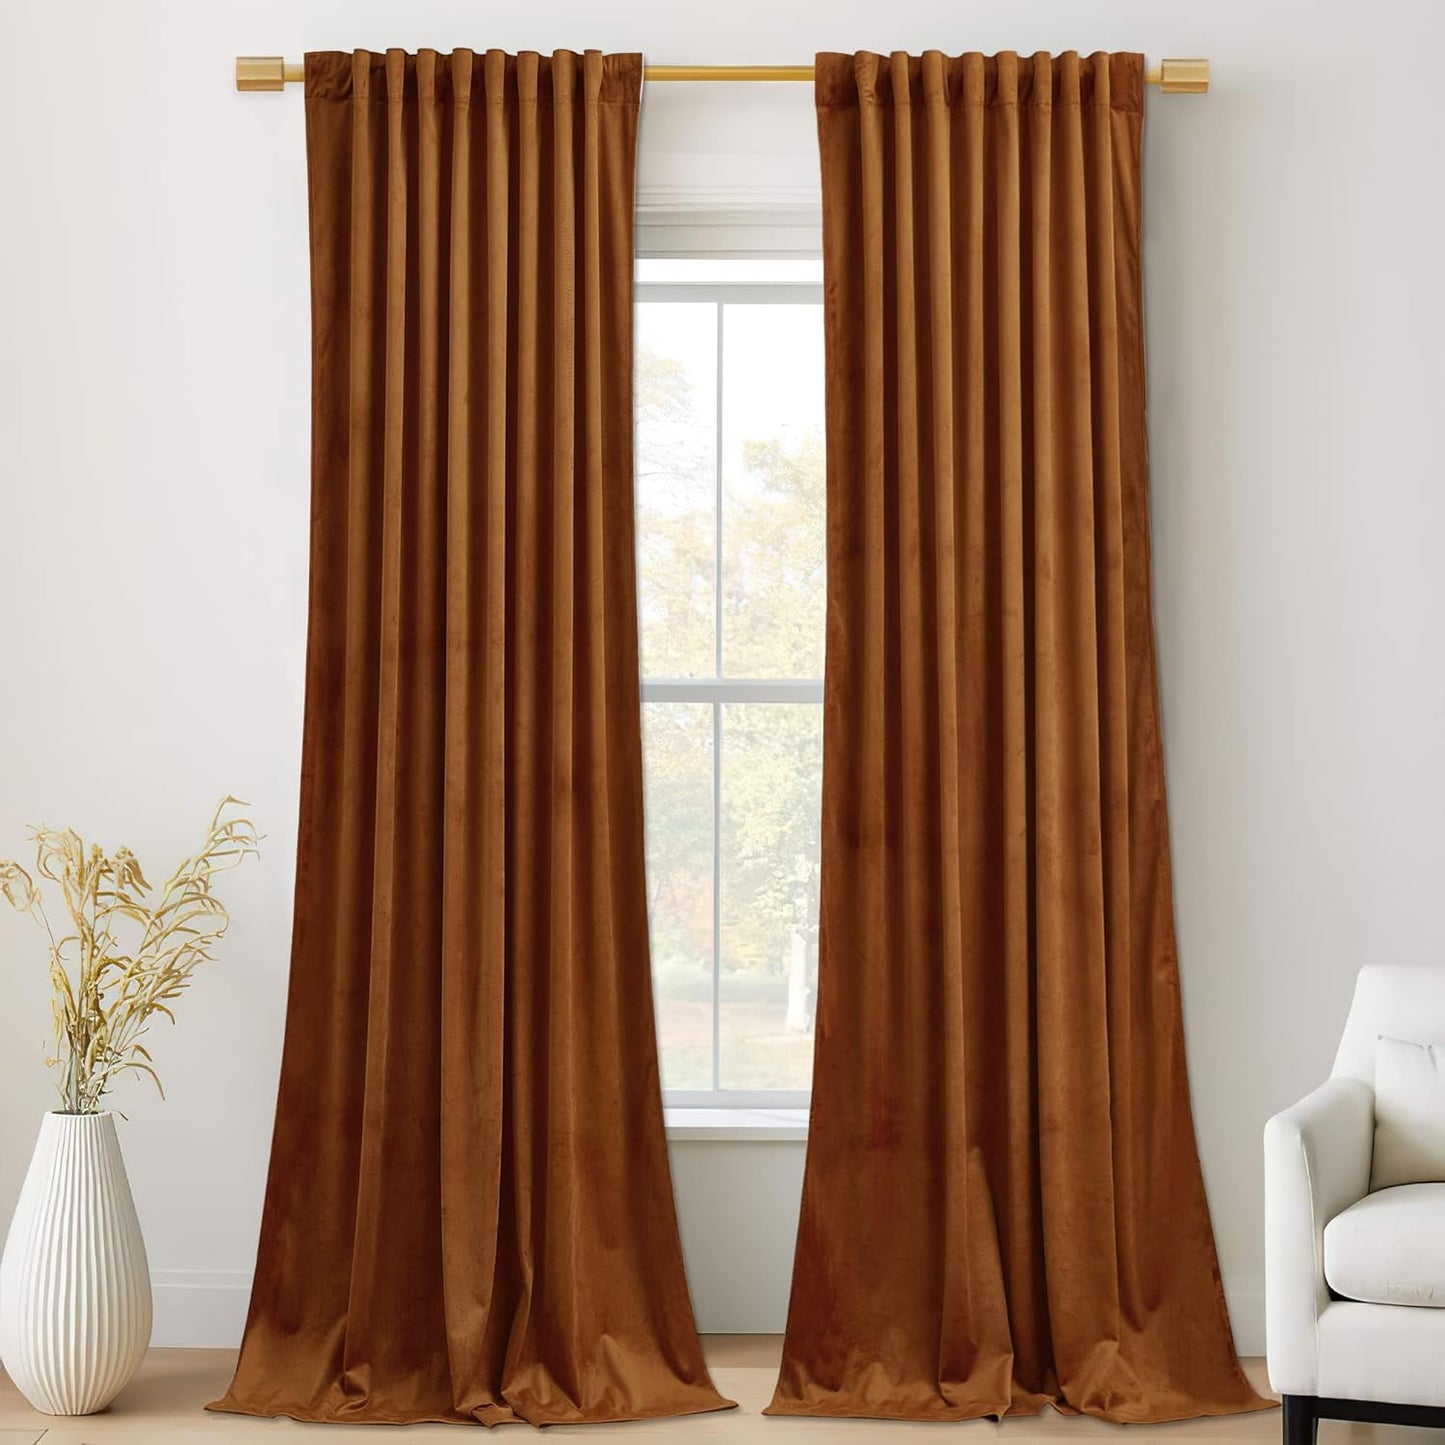 Stangh Velvet Curtains 84 Inches - Gold Brown Blackout Thermal Insulated Window Drapes for Living Room, Back Tab Luxury Home Decor Curtains for Bedroom Sliding Door, W52 X L84, 2 Panels  StangH Burnt Orange W52" X L120" 